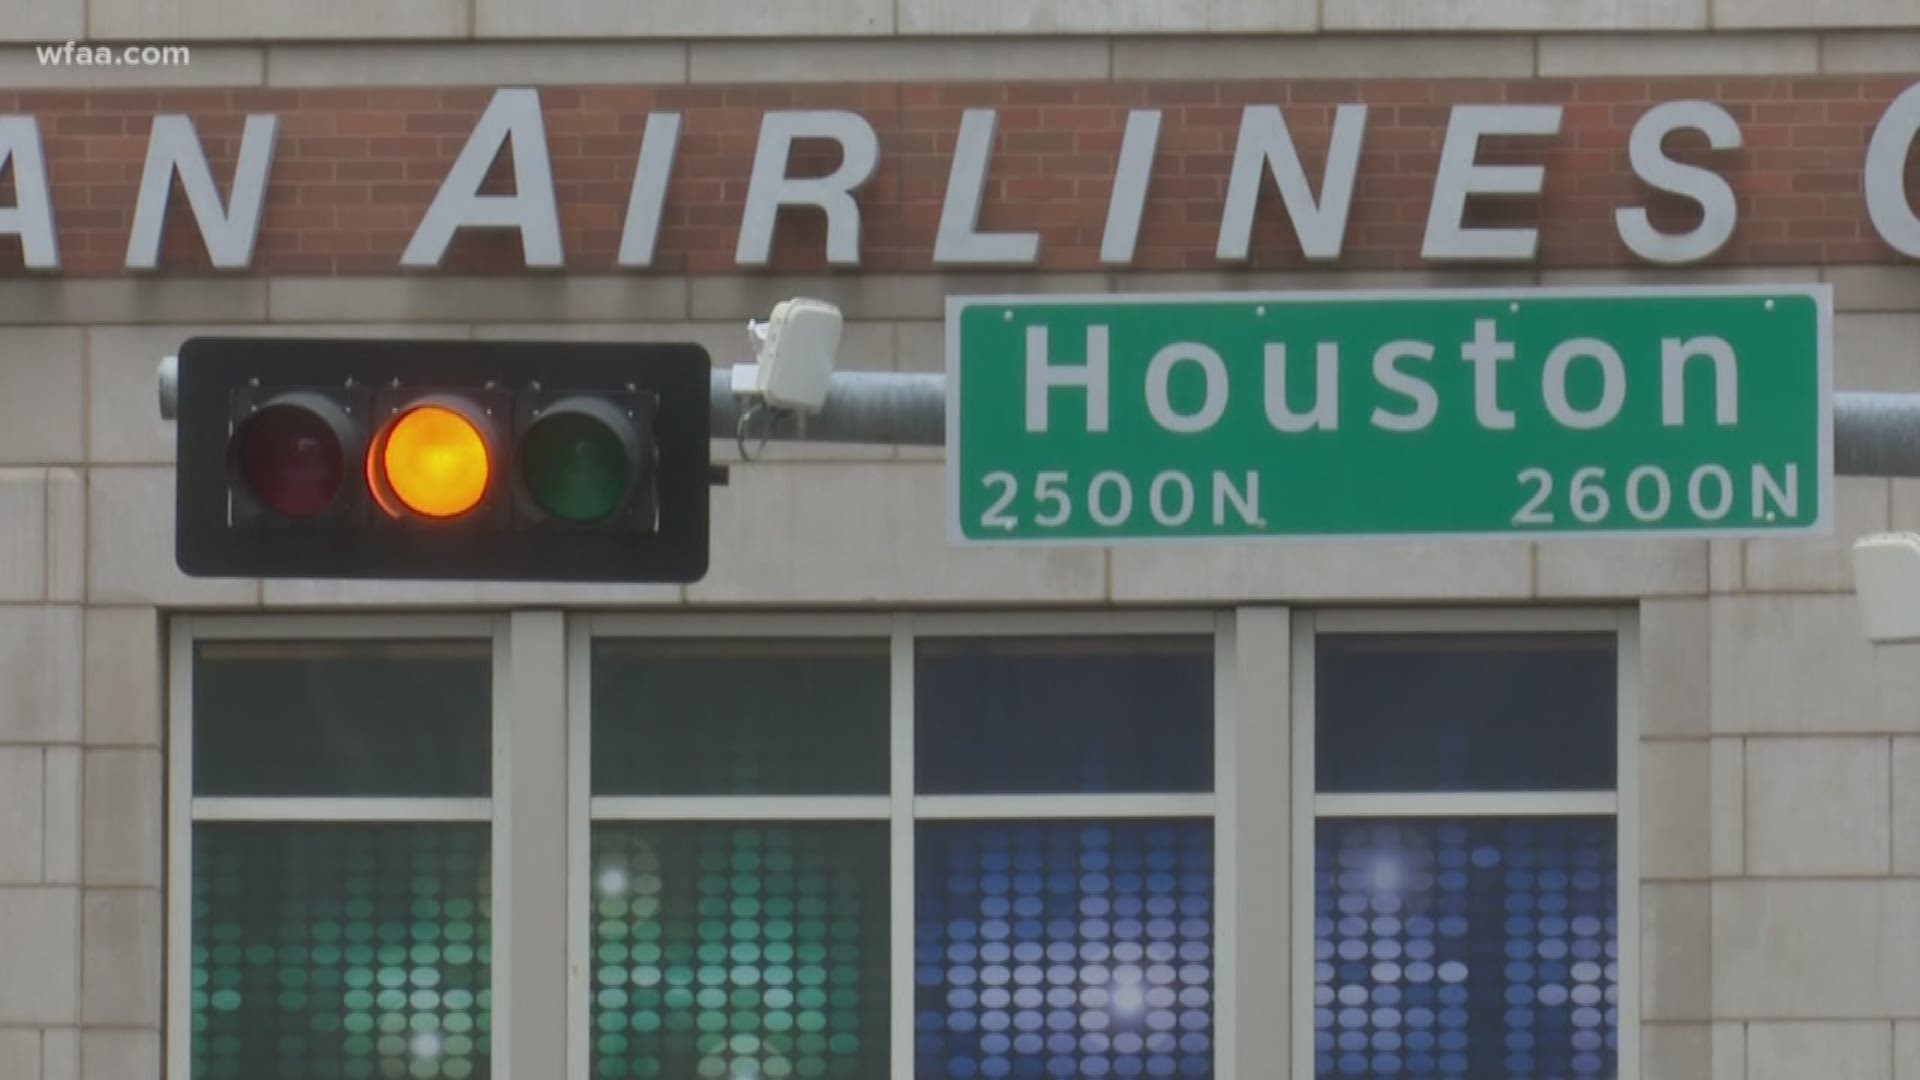 A Dallas mayoral candidate wants to rename part of Houston Street in front of the American Airlines Center after Dirk Nowitzki.